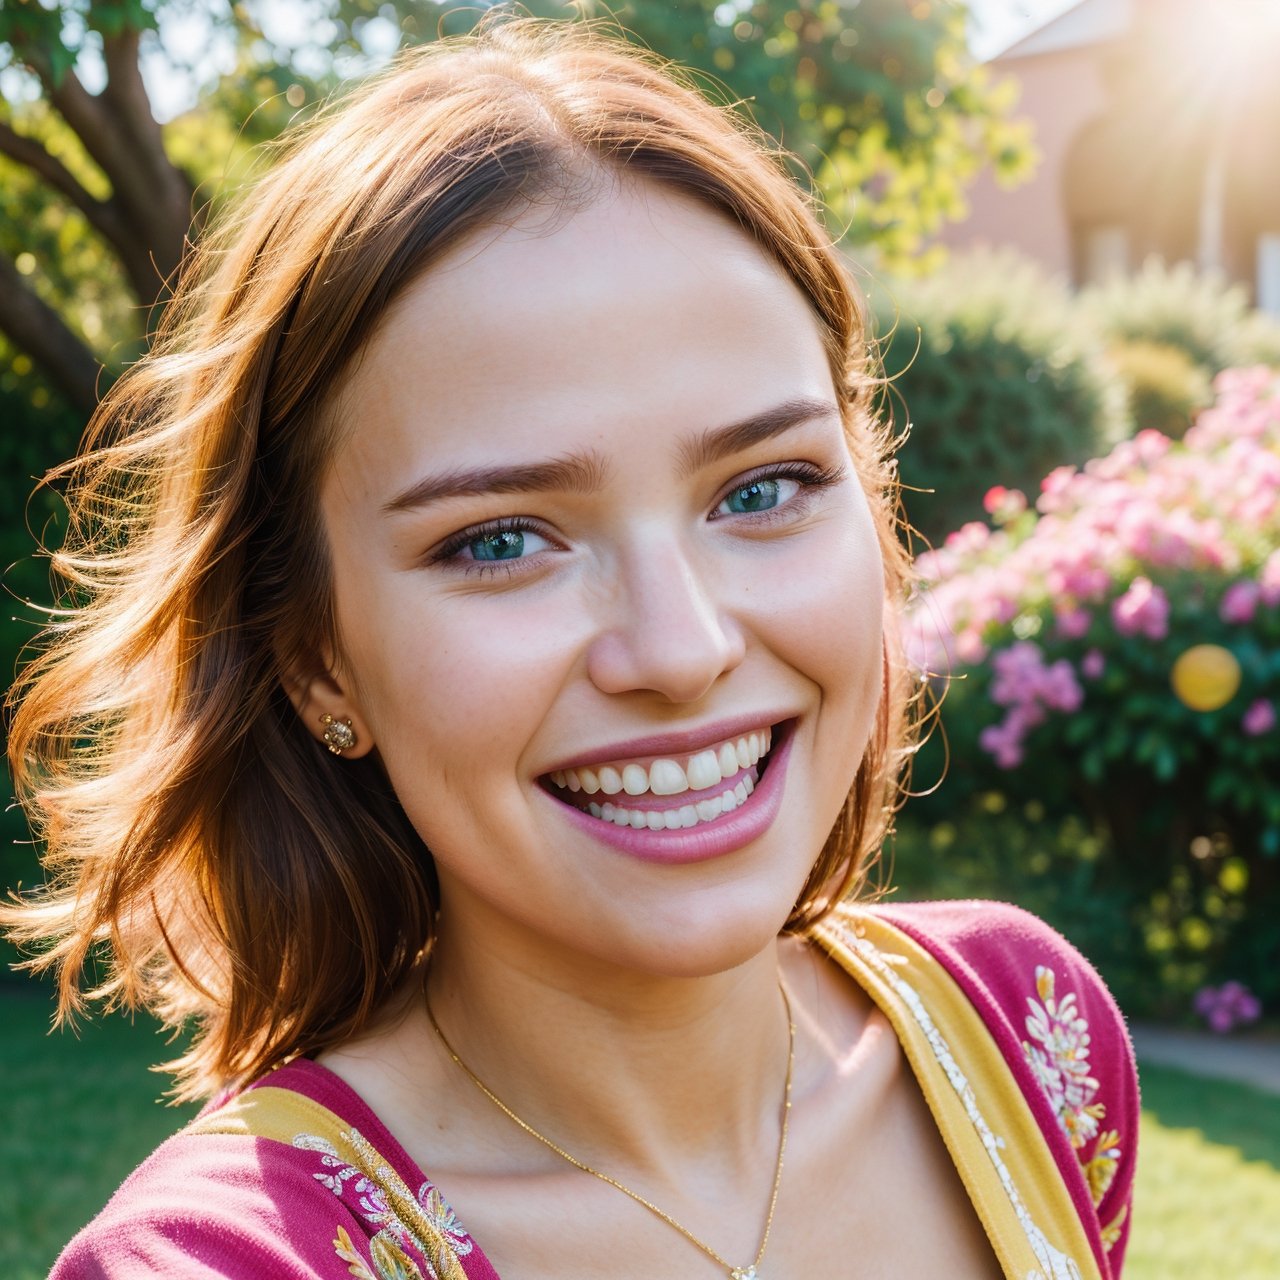 (best quality,4k,8k,highres,masterpiece:1.2),ultra-detailed,(realistic,photorealistic,photo-realistic:1.37),portraits,laughing faces,happy expressions,colorful,sunlit garden,girl with sparkling eyes,joyful atmosphere,warm sunlight,happiness and laughter,bright and vibrant colors